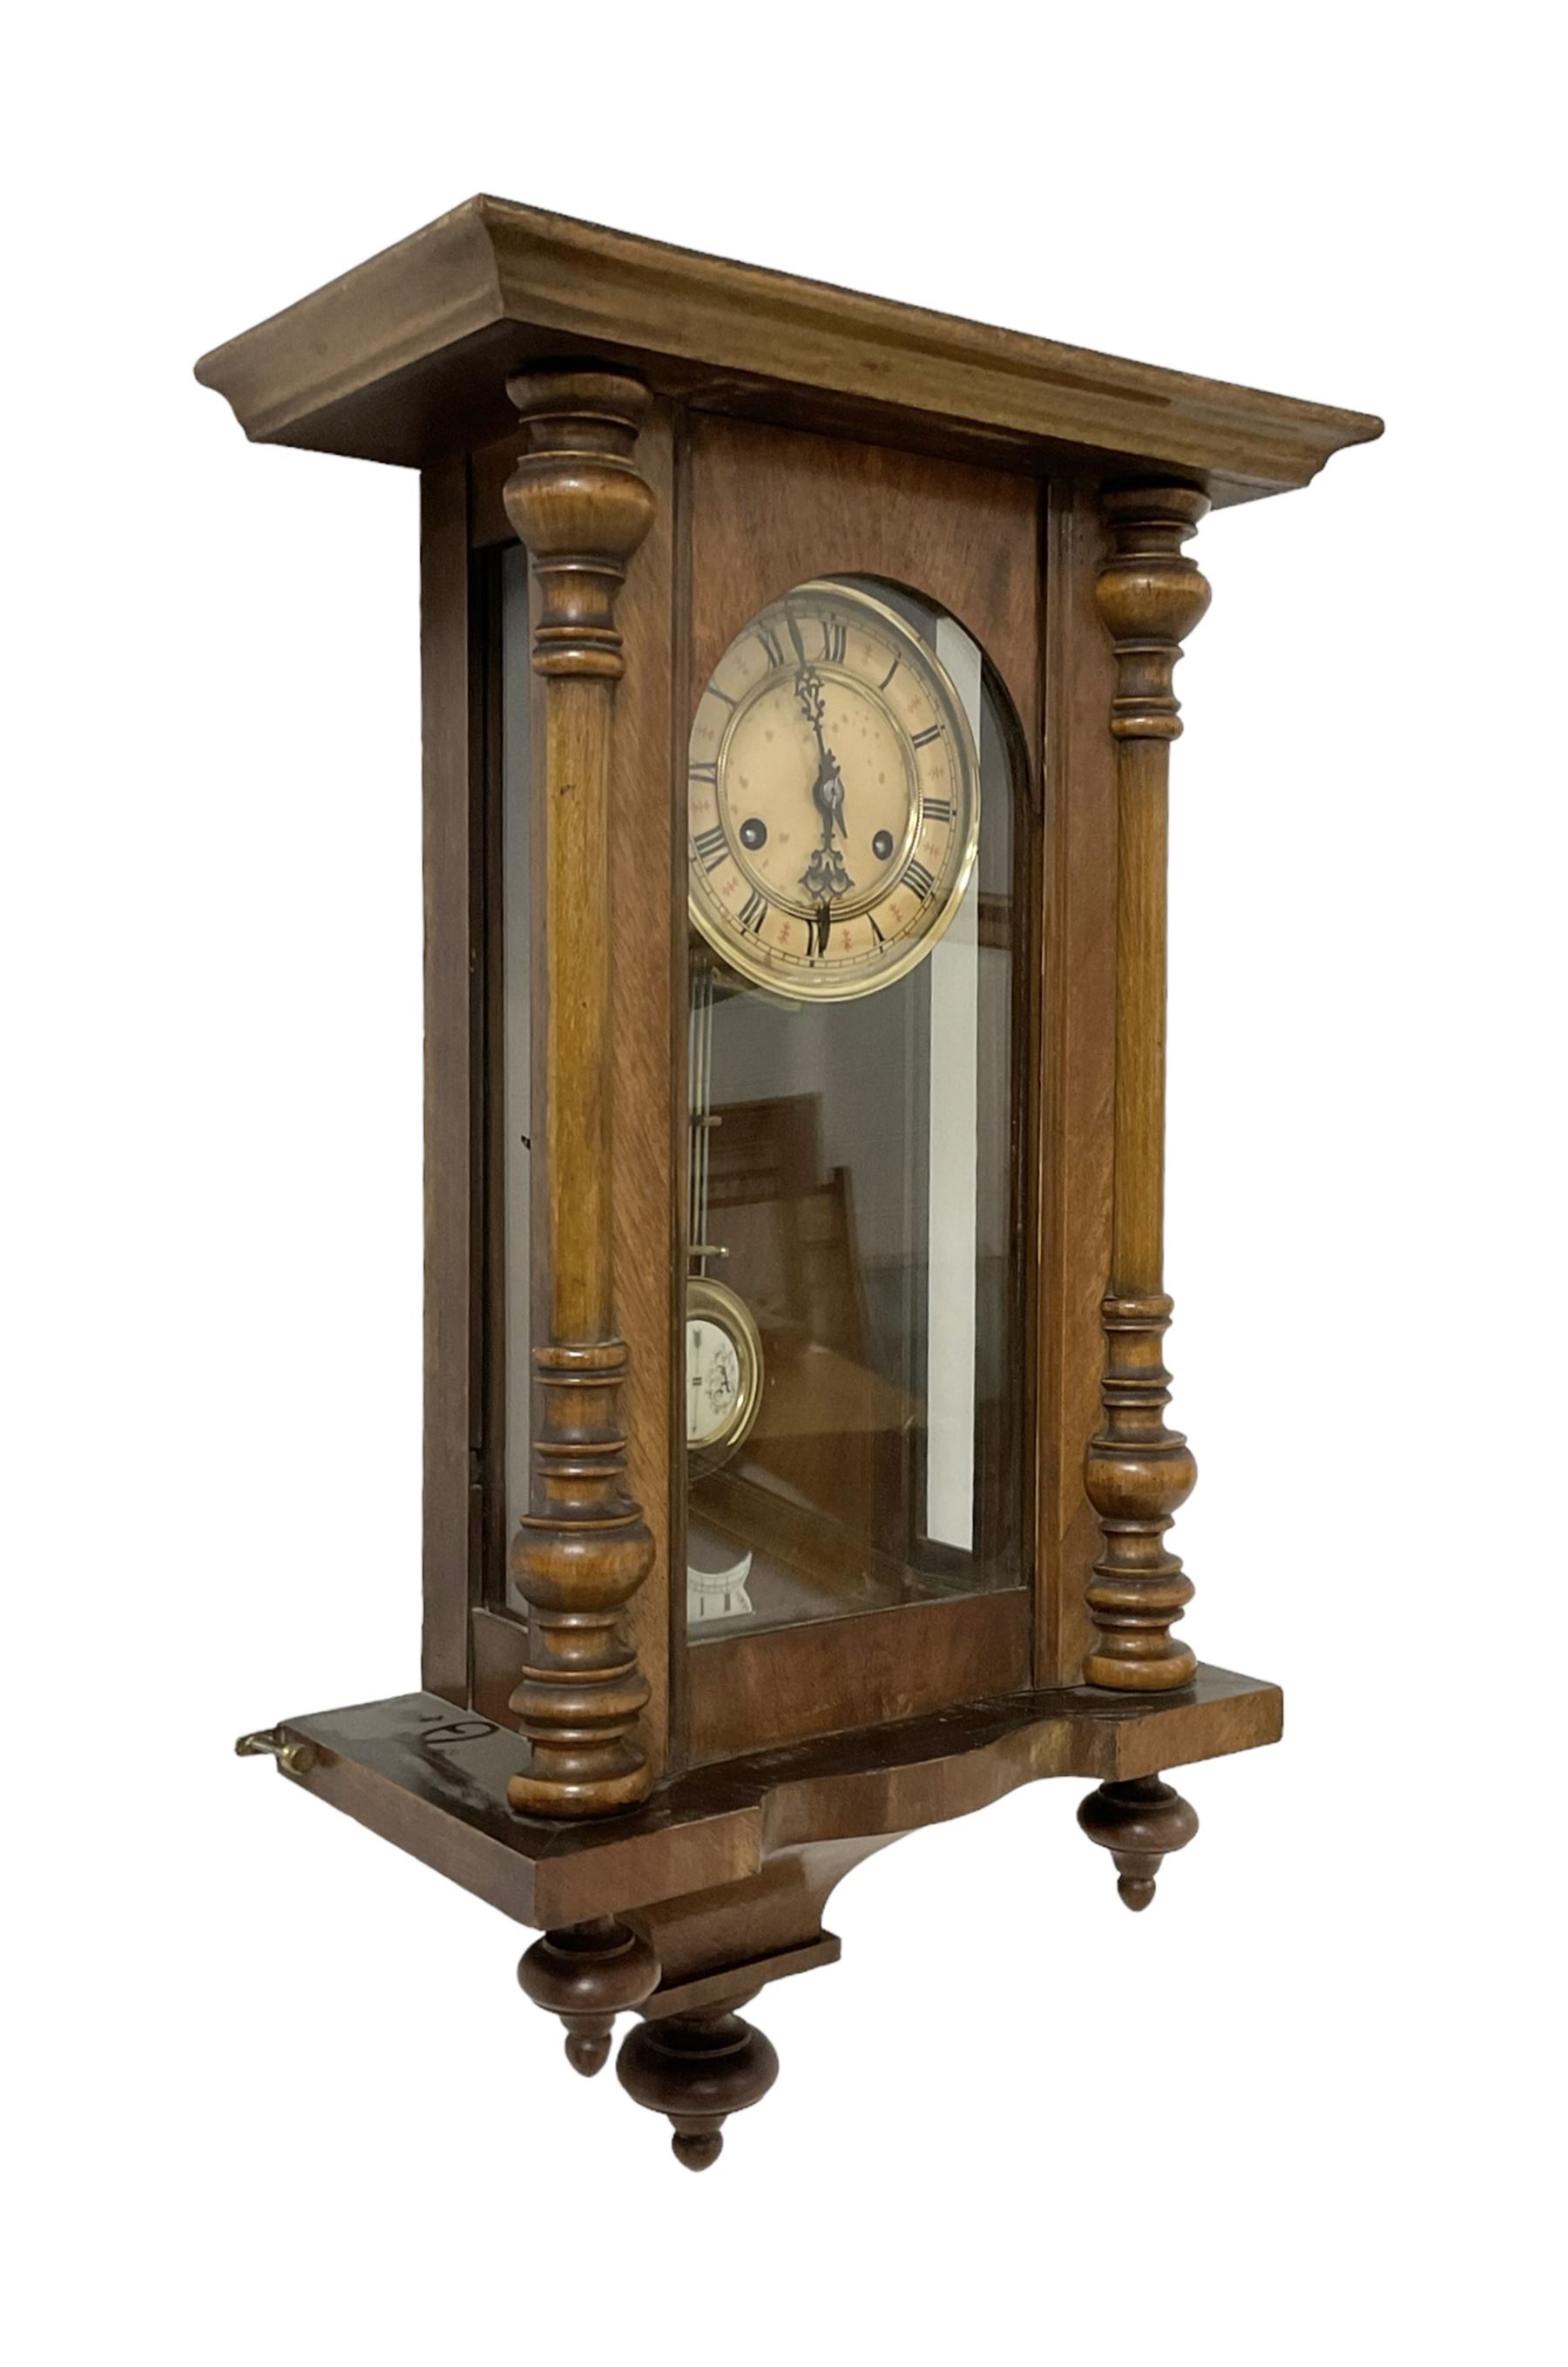 German - 19th-century spring driven wall clock with pendulum and key. - Image 2 of 3